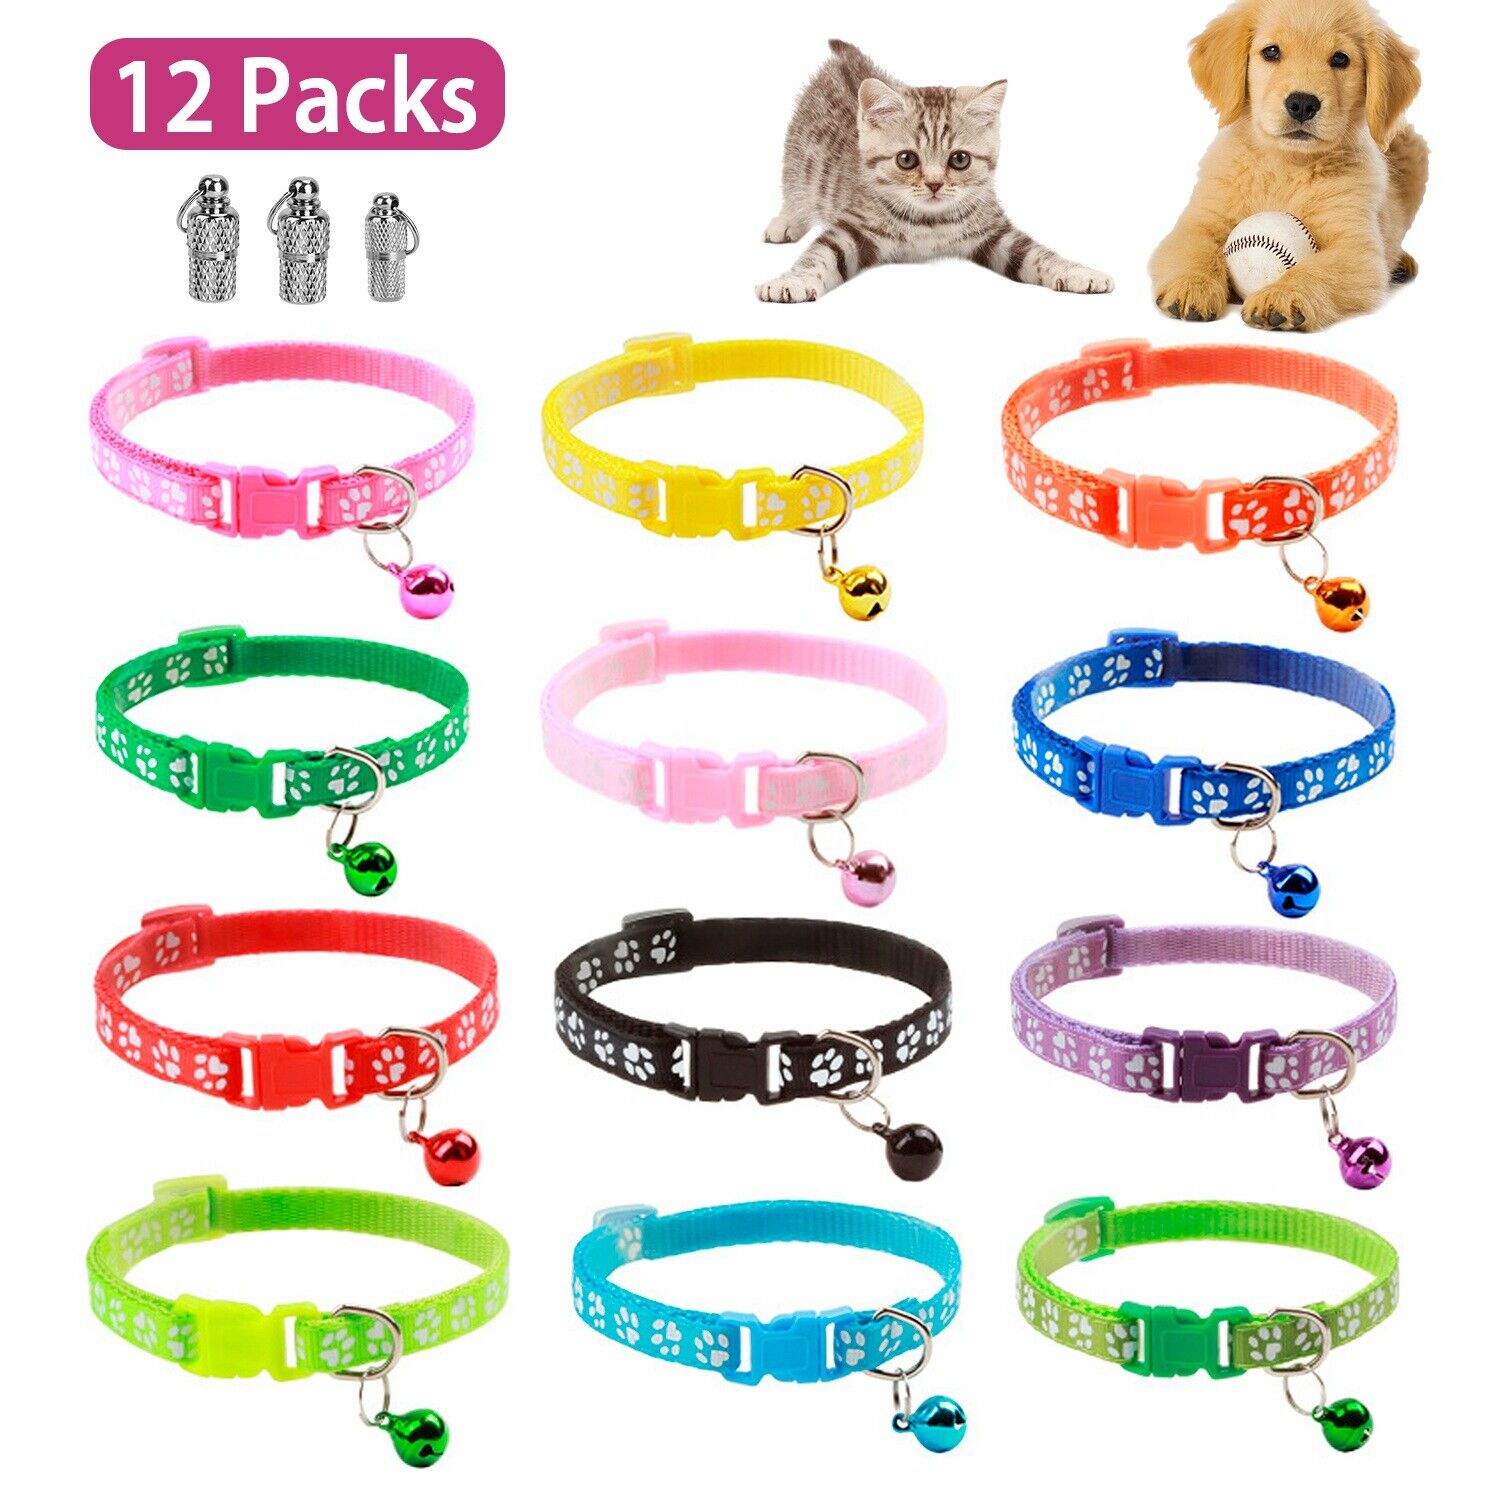 12Pcs Adjustable Bell Name Tag Safety Buckle Collar For Cat kitten Dog Puppy Pet iMounTEK Does not apply